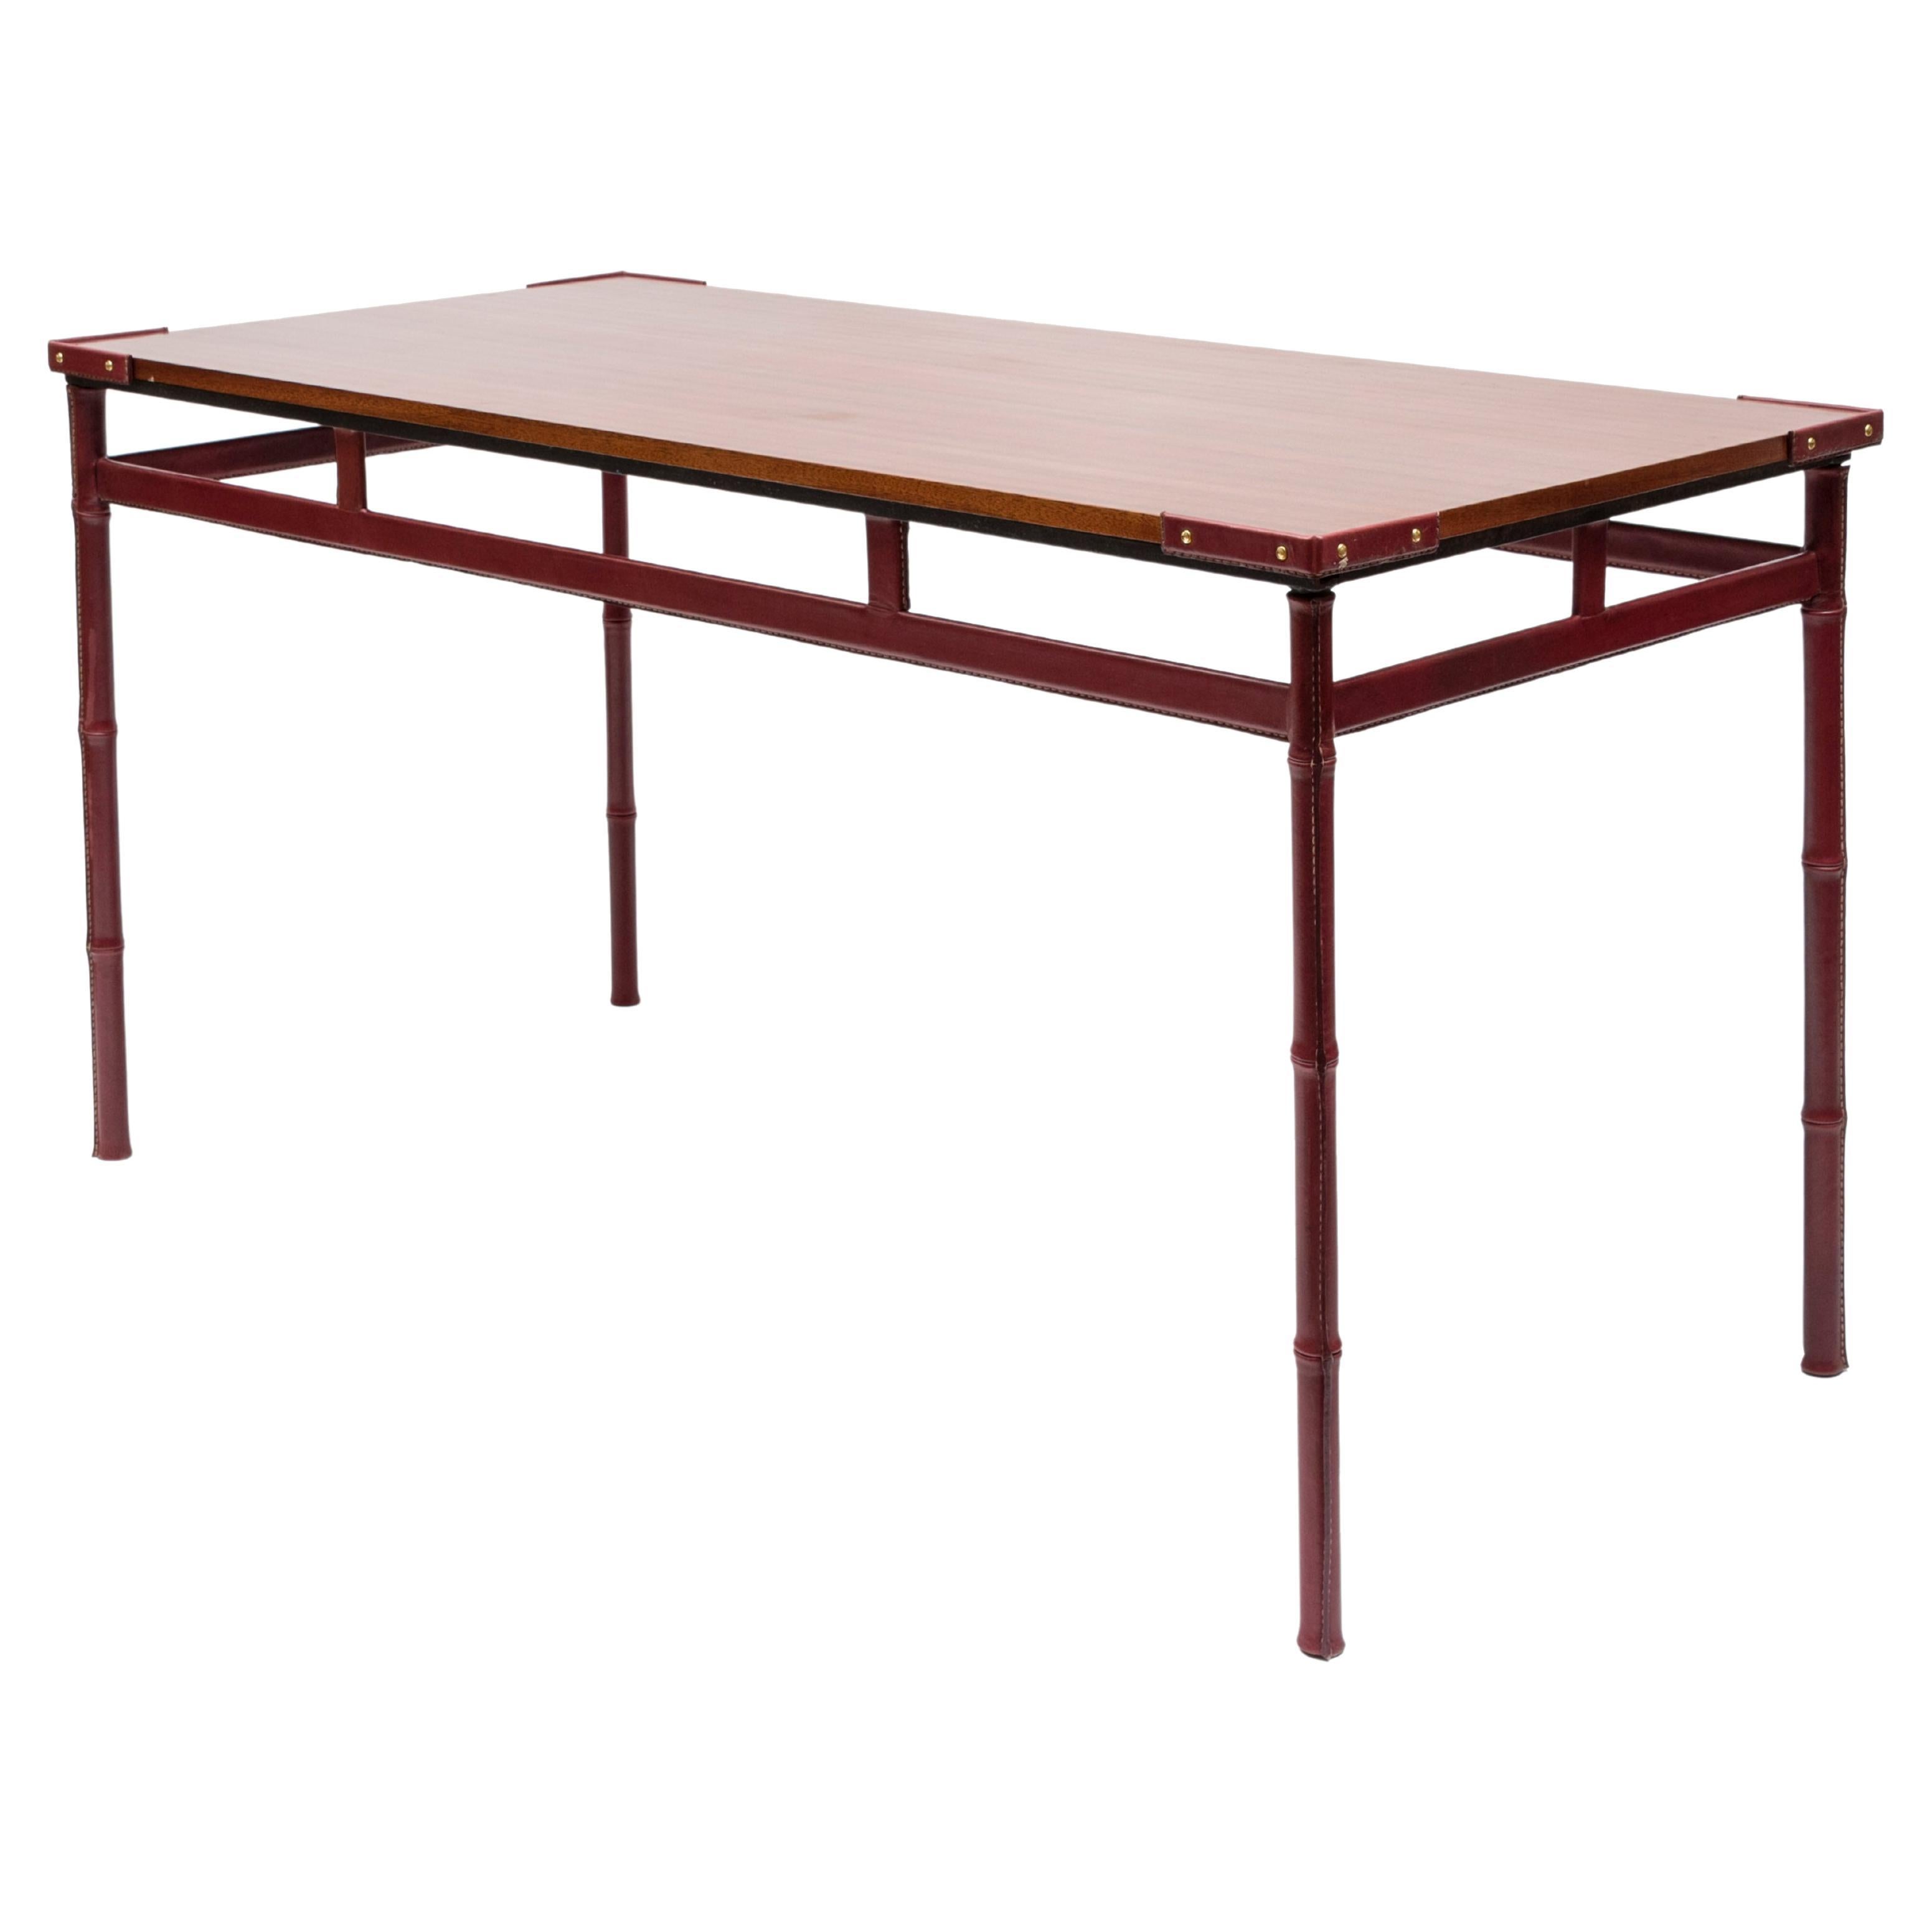 1950's Stitched leather table by Jacques Adnet For Sale